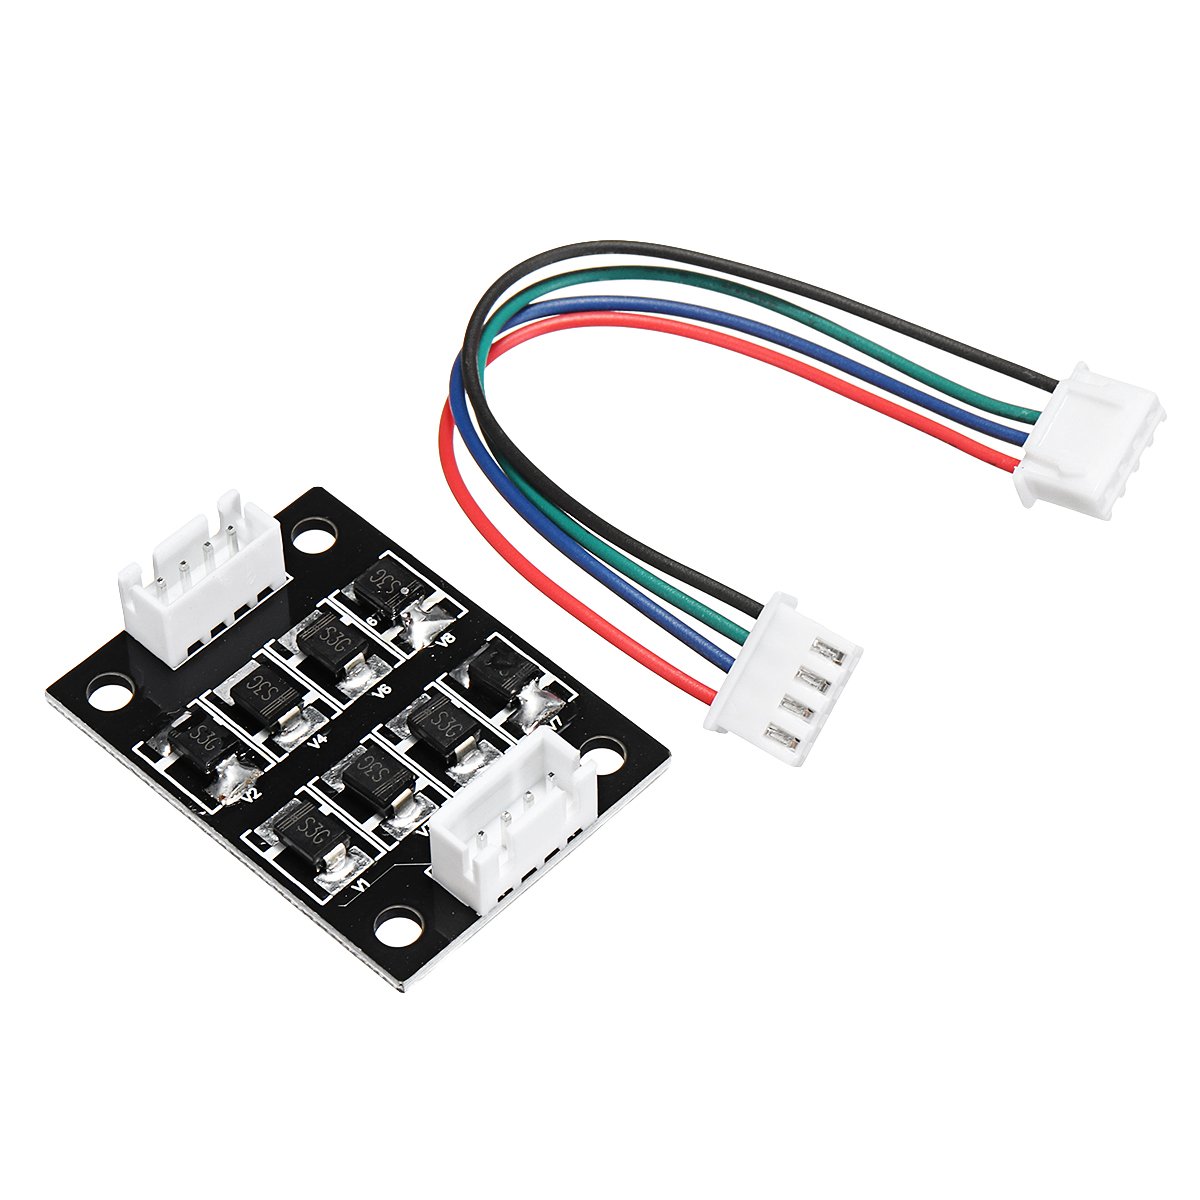 5PCS TL-Smoother Addon Module With Dupont Line For 3D Printer Stepper Motor 2